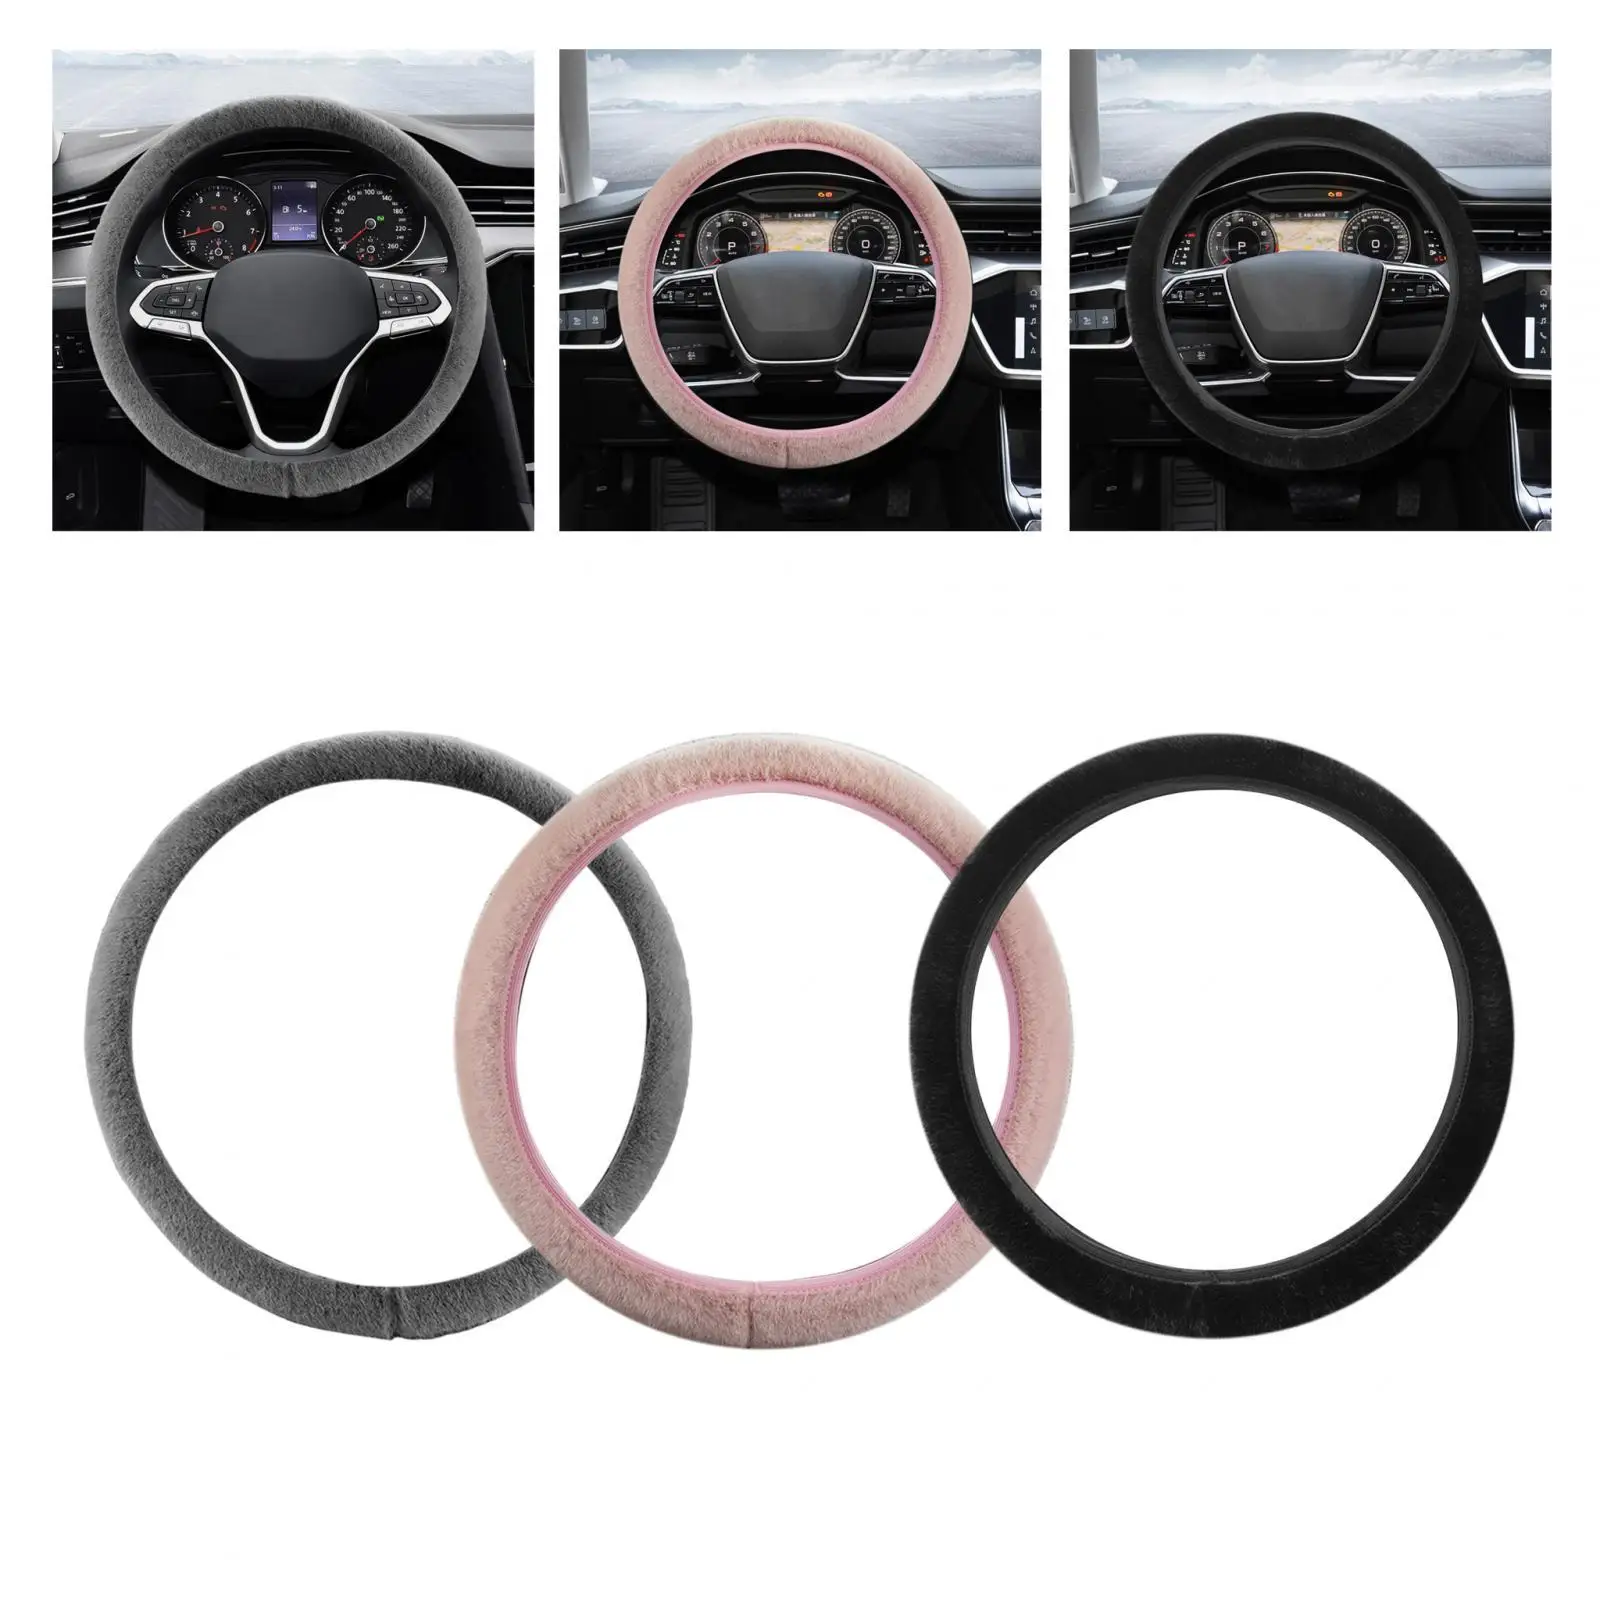 15inch Winter Plush Steering Wheel Cover Protector Convenient Assemble Durable Lightweight Accessory Comfortable Warm Anti Slip